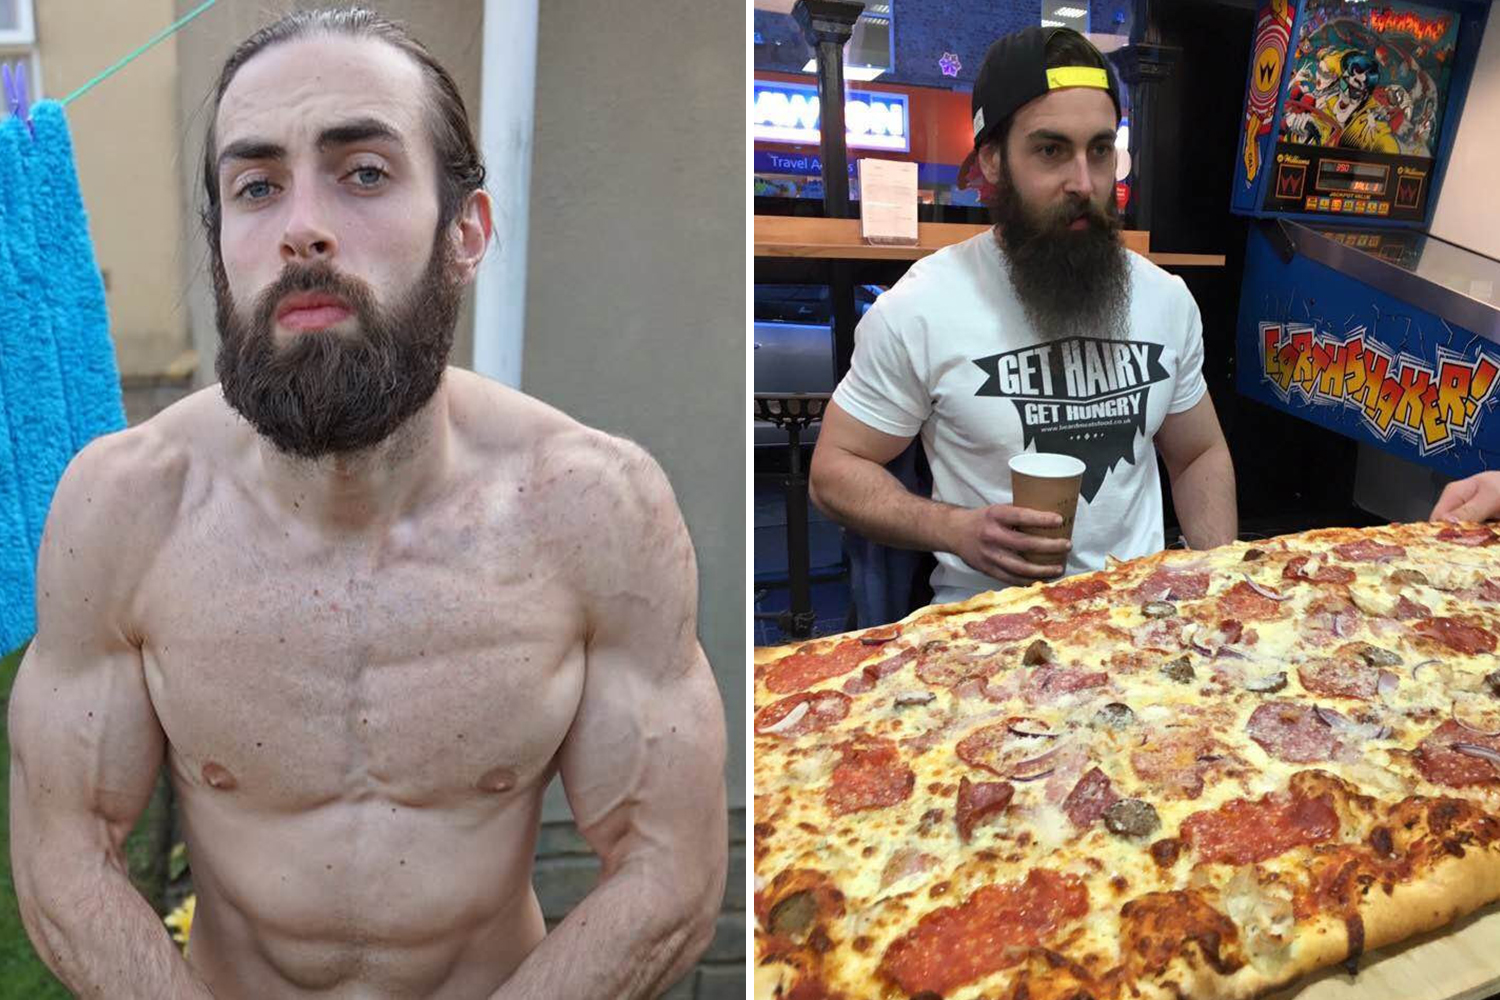 MAN GETS BODY FAT DOWN TO EIGHT PER CENT BY GORGING ON JUNK FOOD